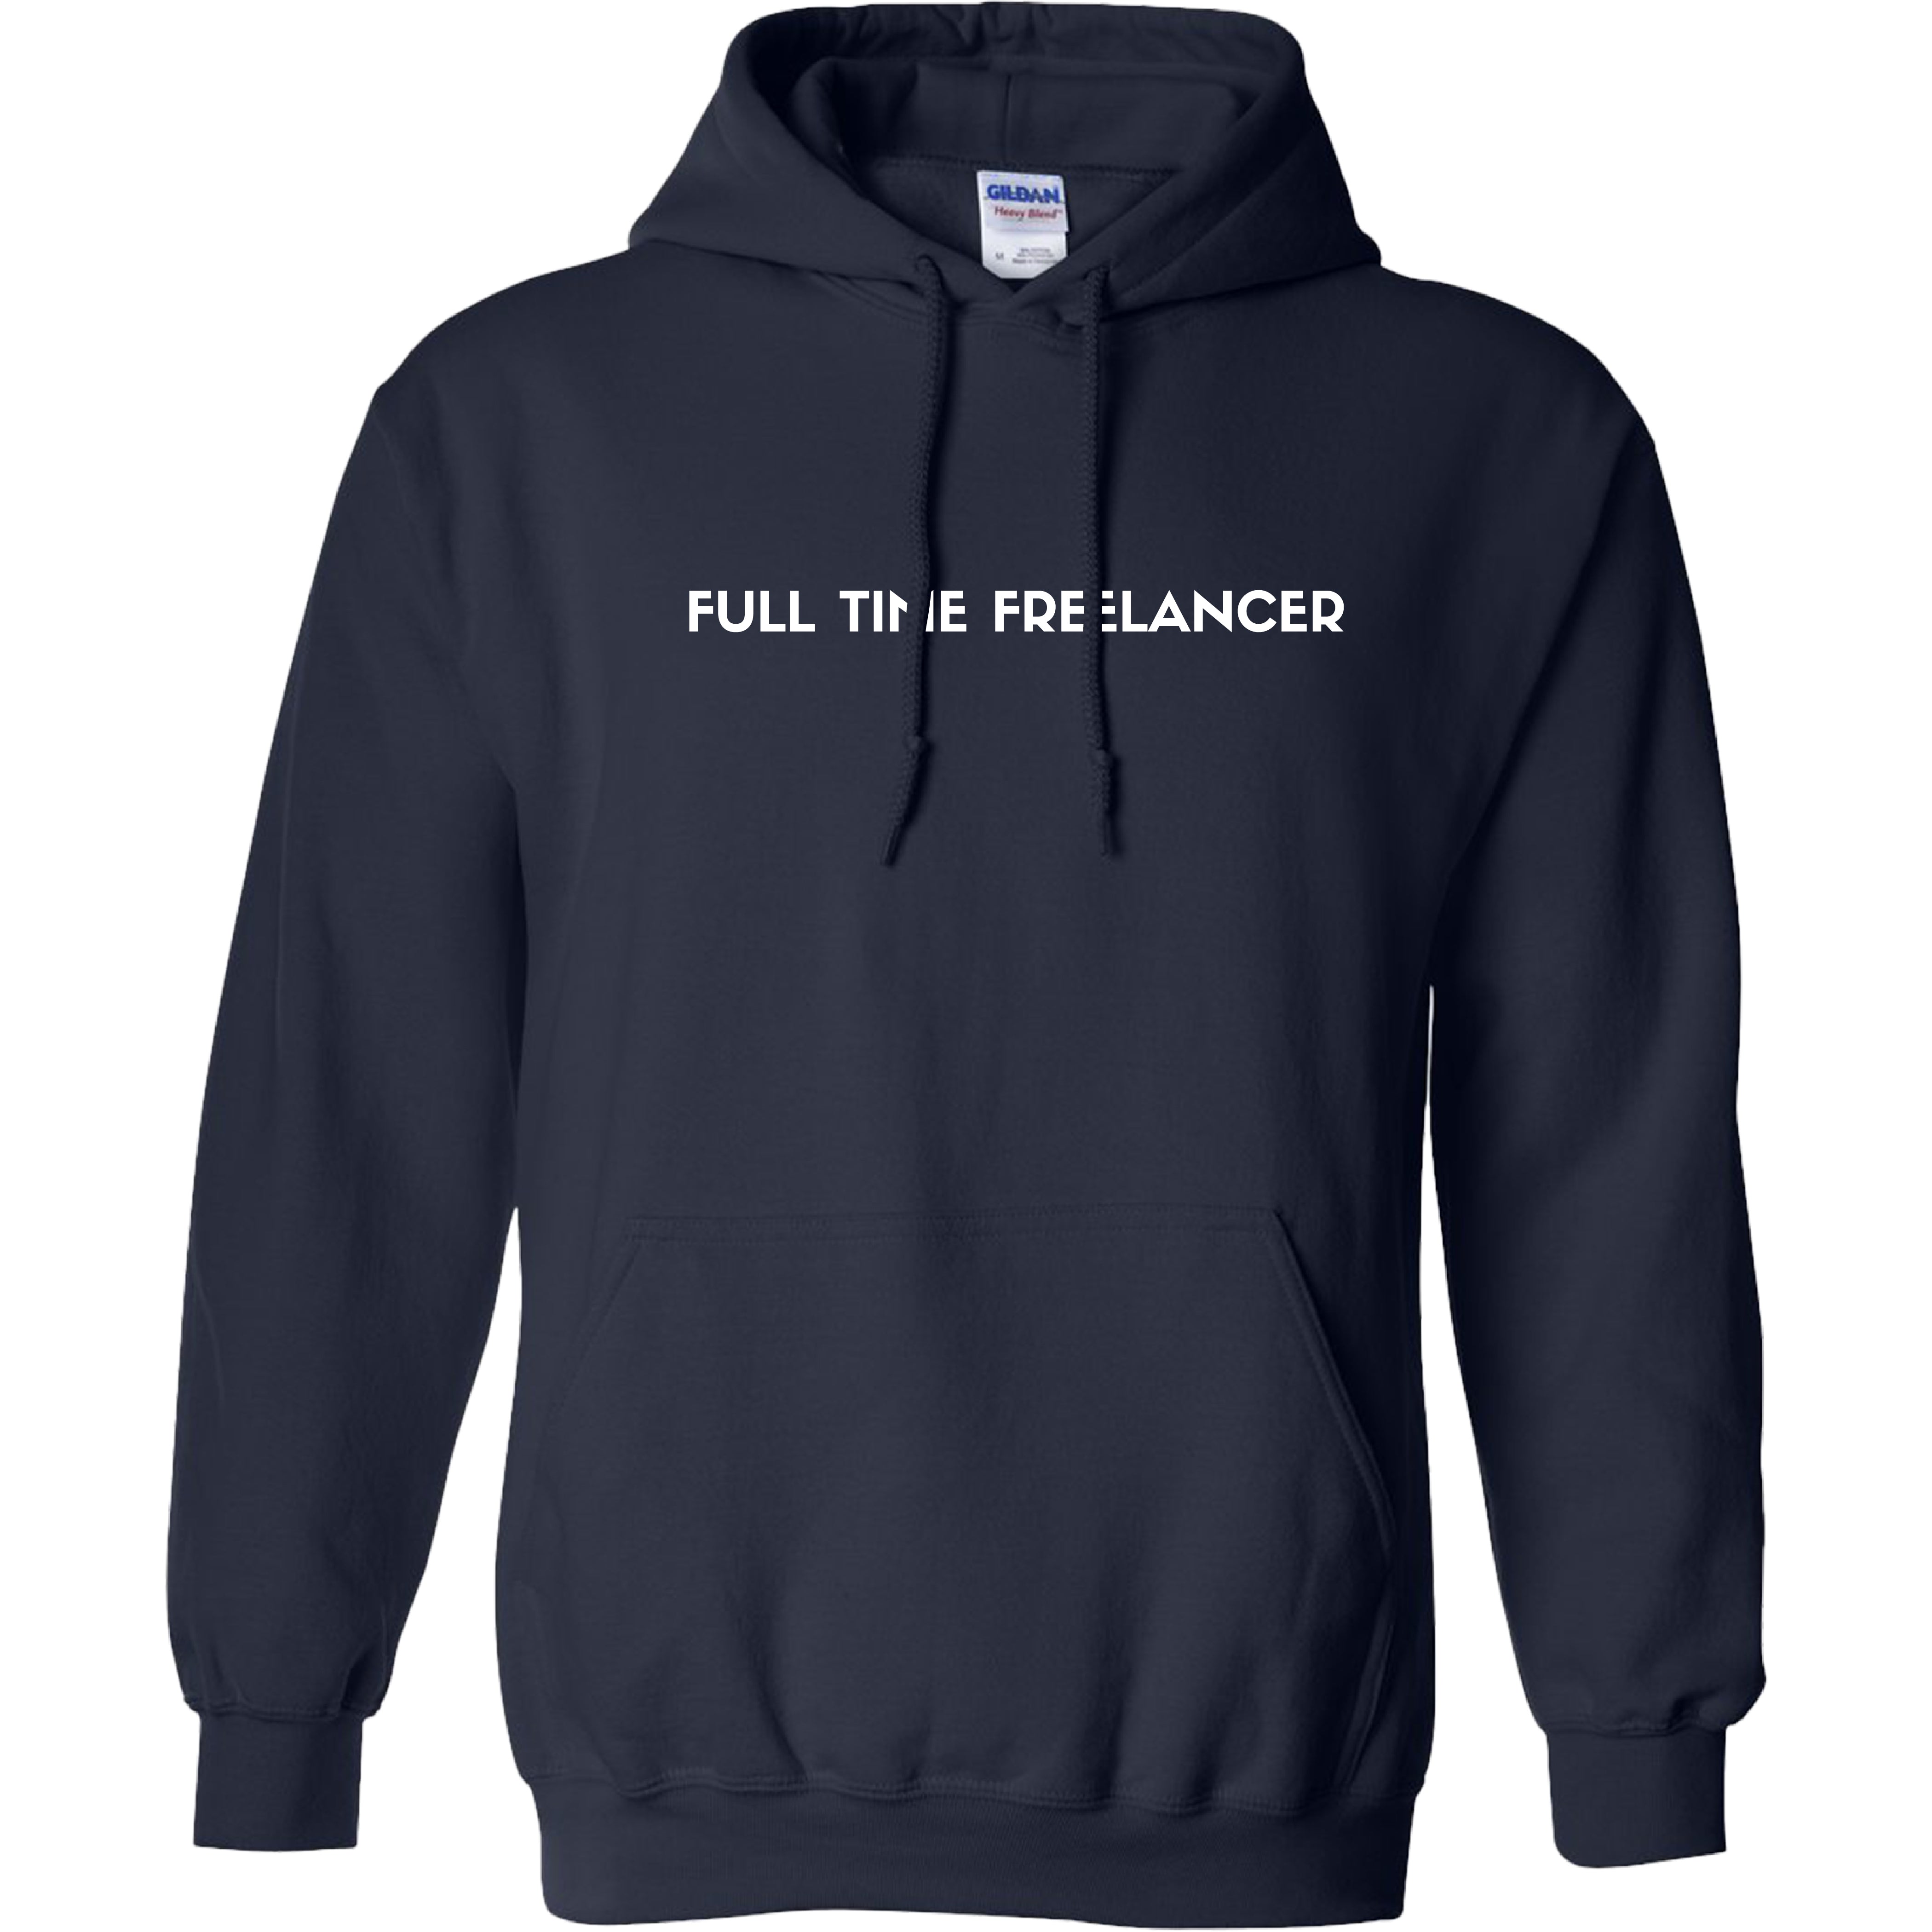 Freelance with Phil - Full Time Freelancer Hoodie